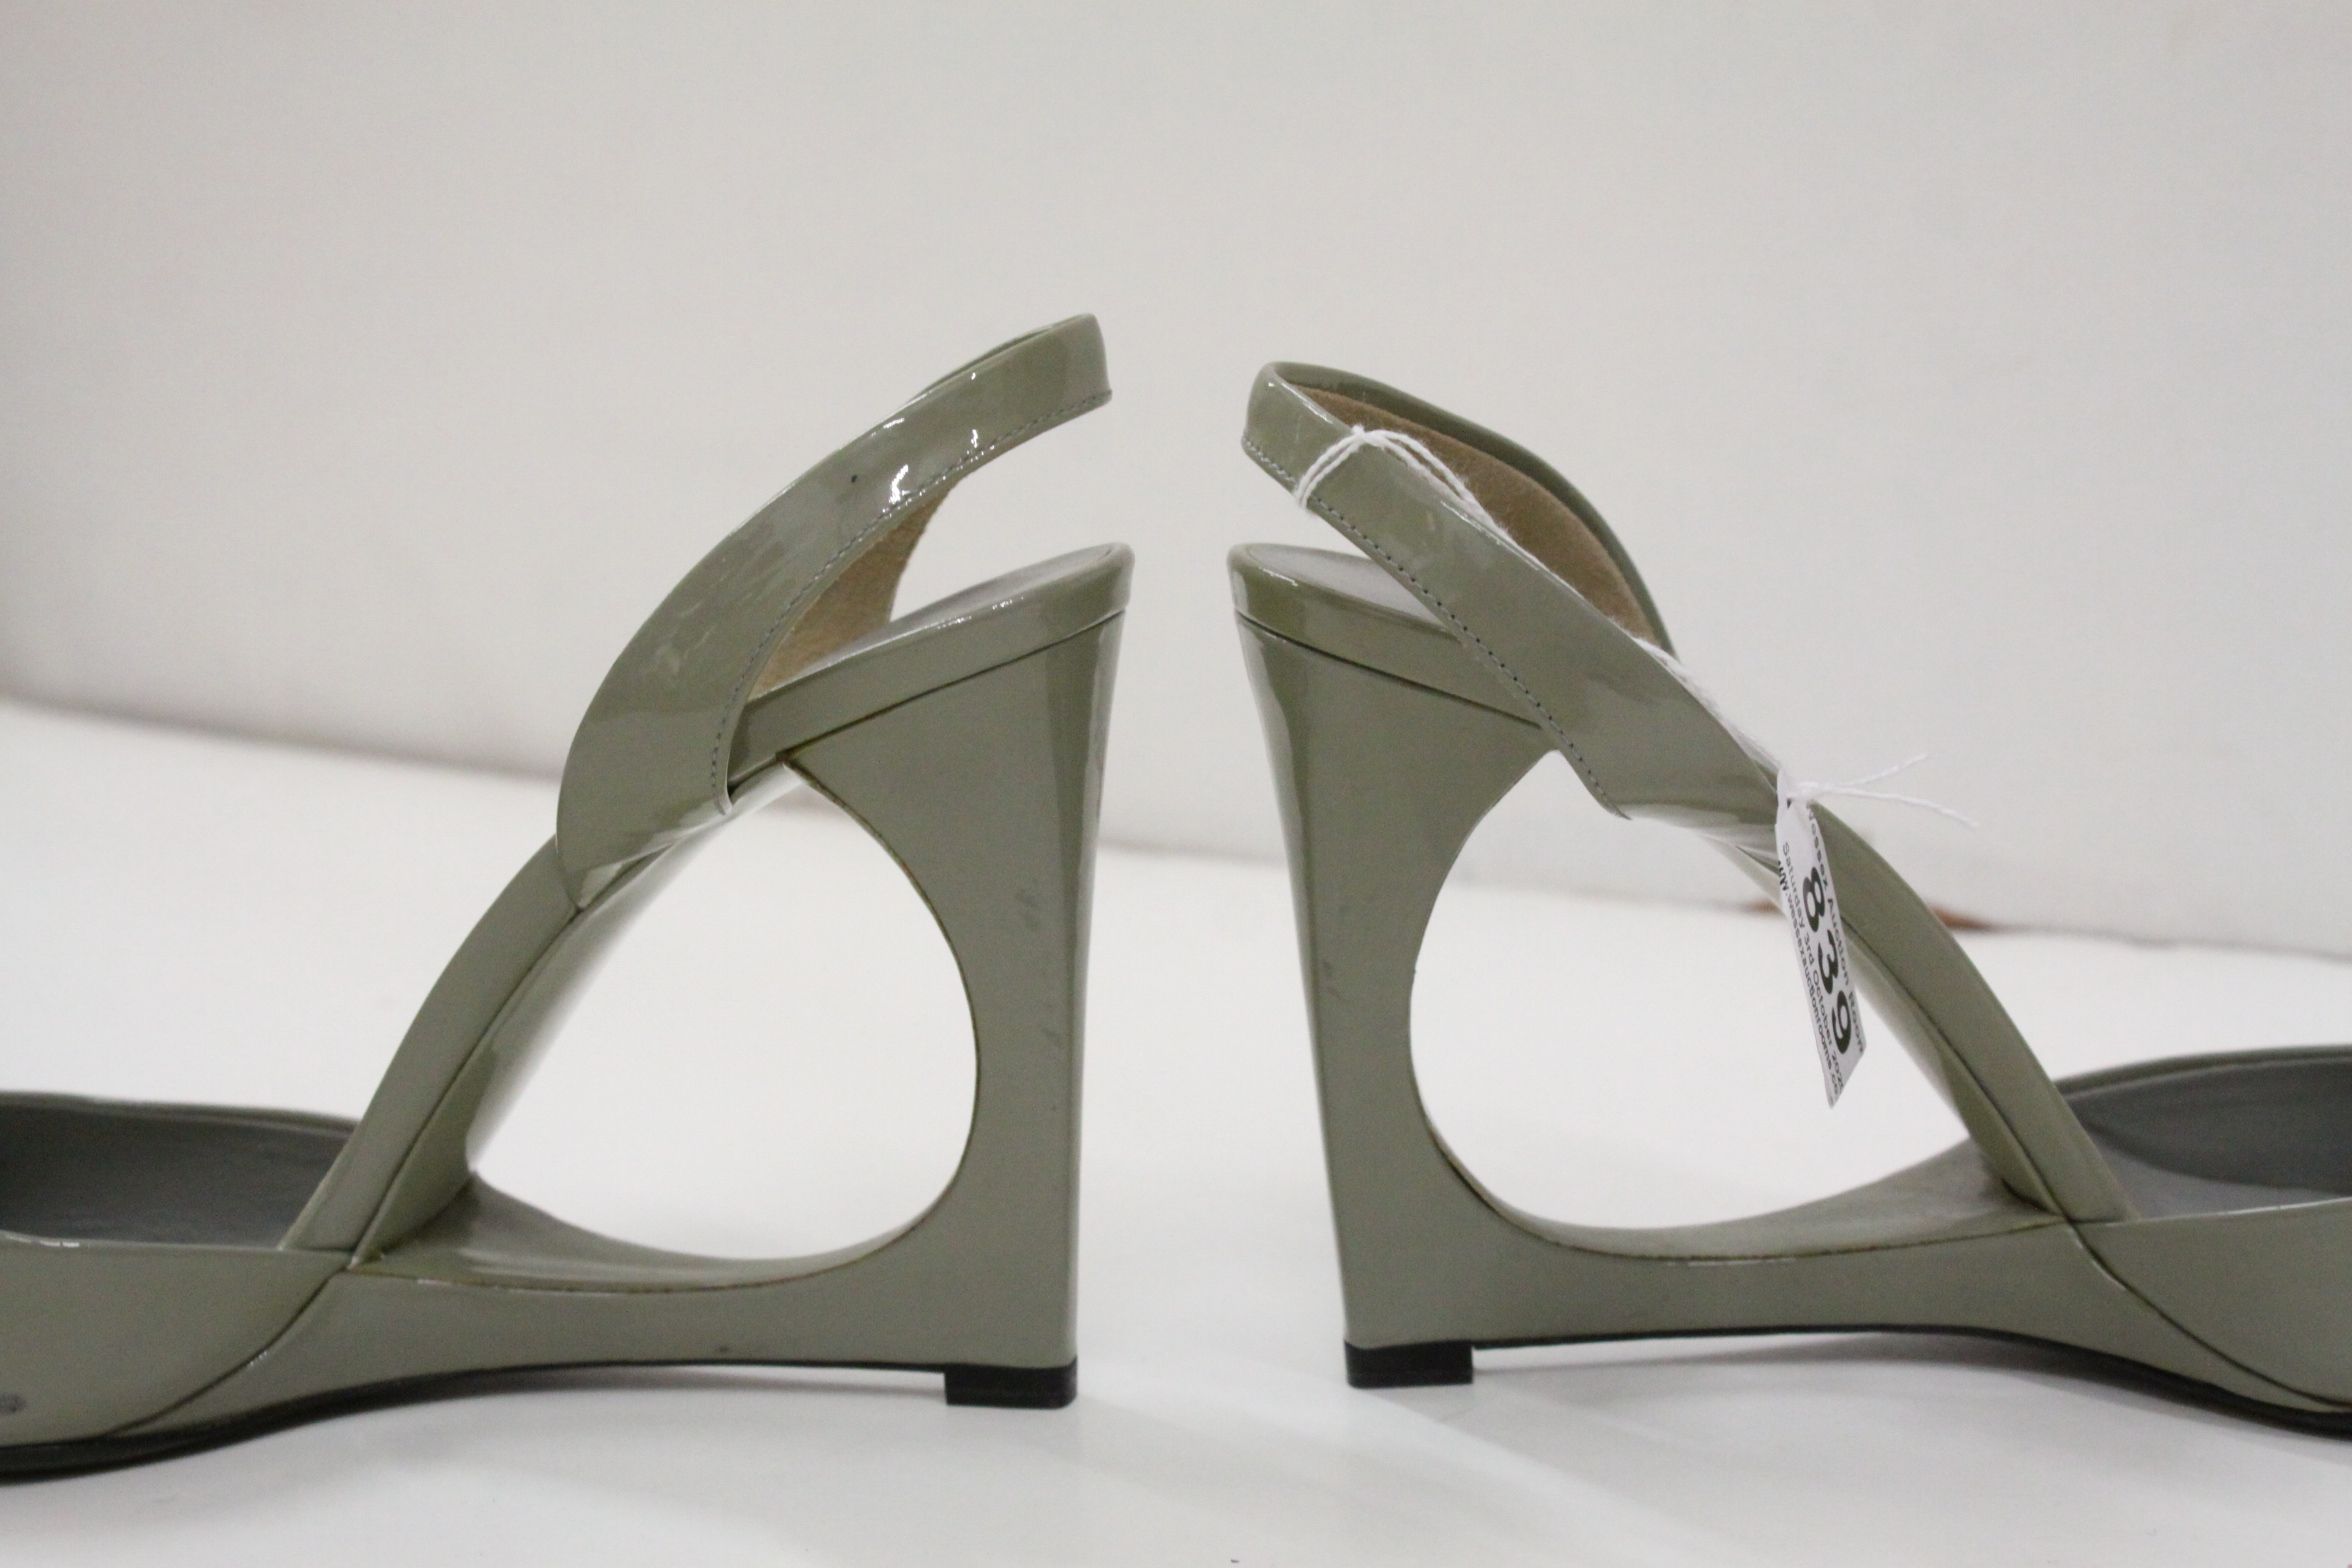 Pair of Jill Sander patent leather green-grey sling back shoes, elongated rounded toe, sculptural - Image 3 of 3